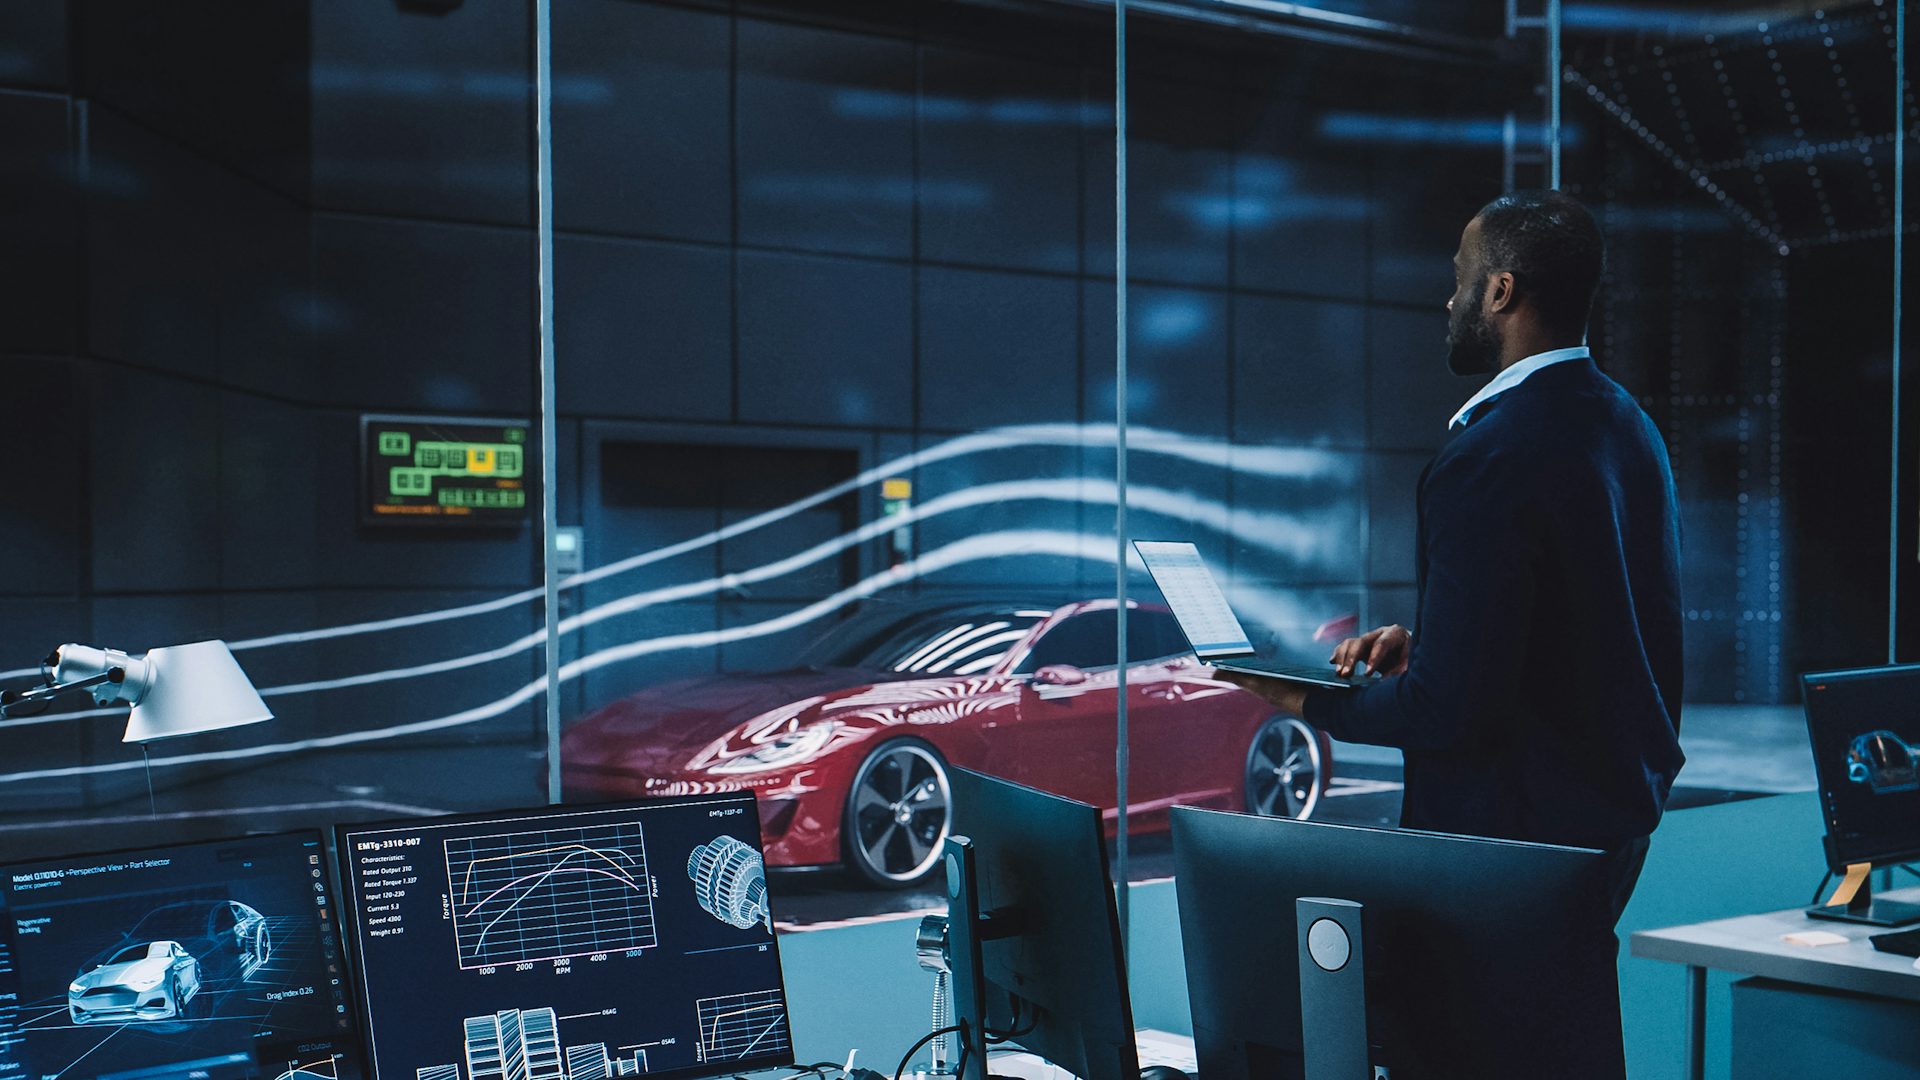 Engineering research agency performs testing with an electric sports car in a wind tunnel. Professional works on a laptop changing testing options.